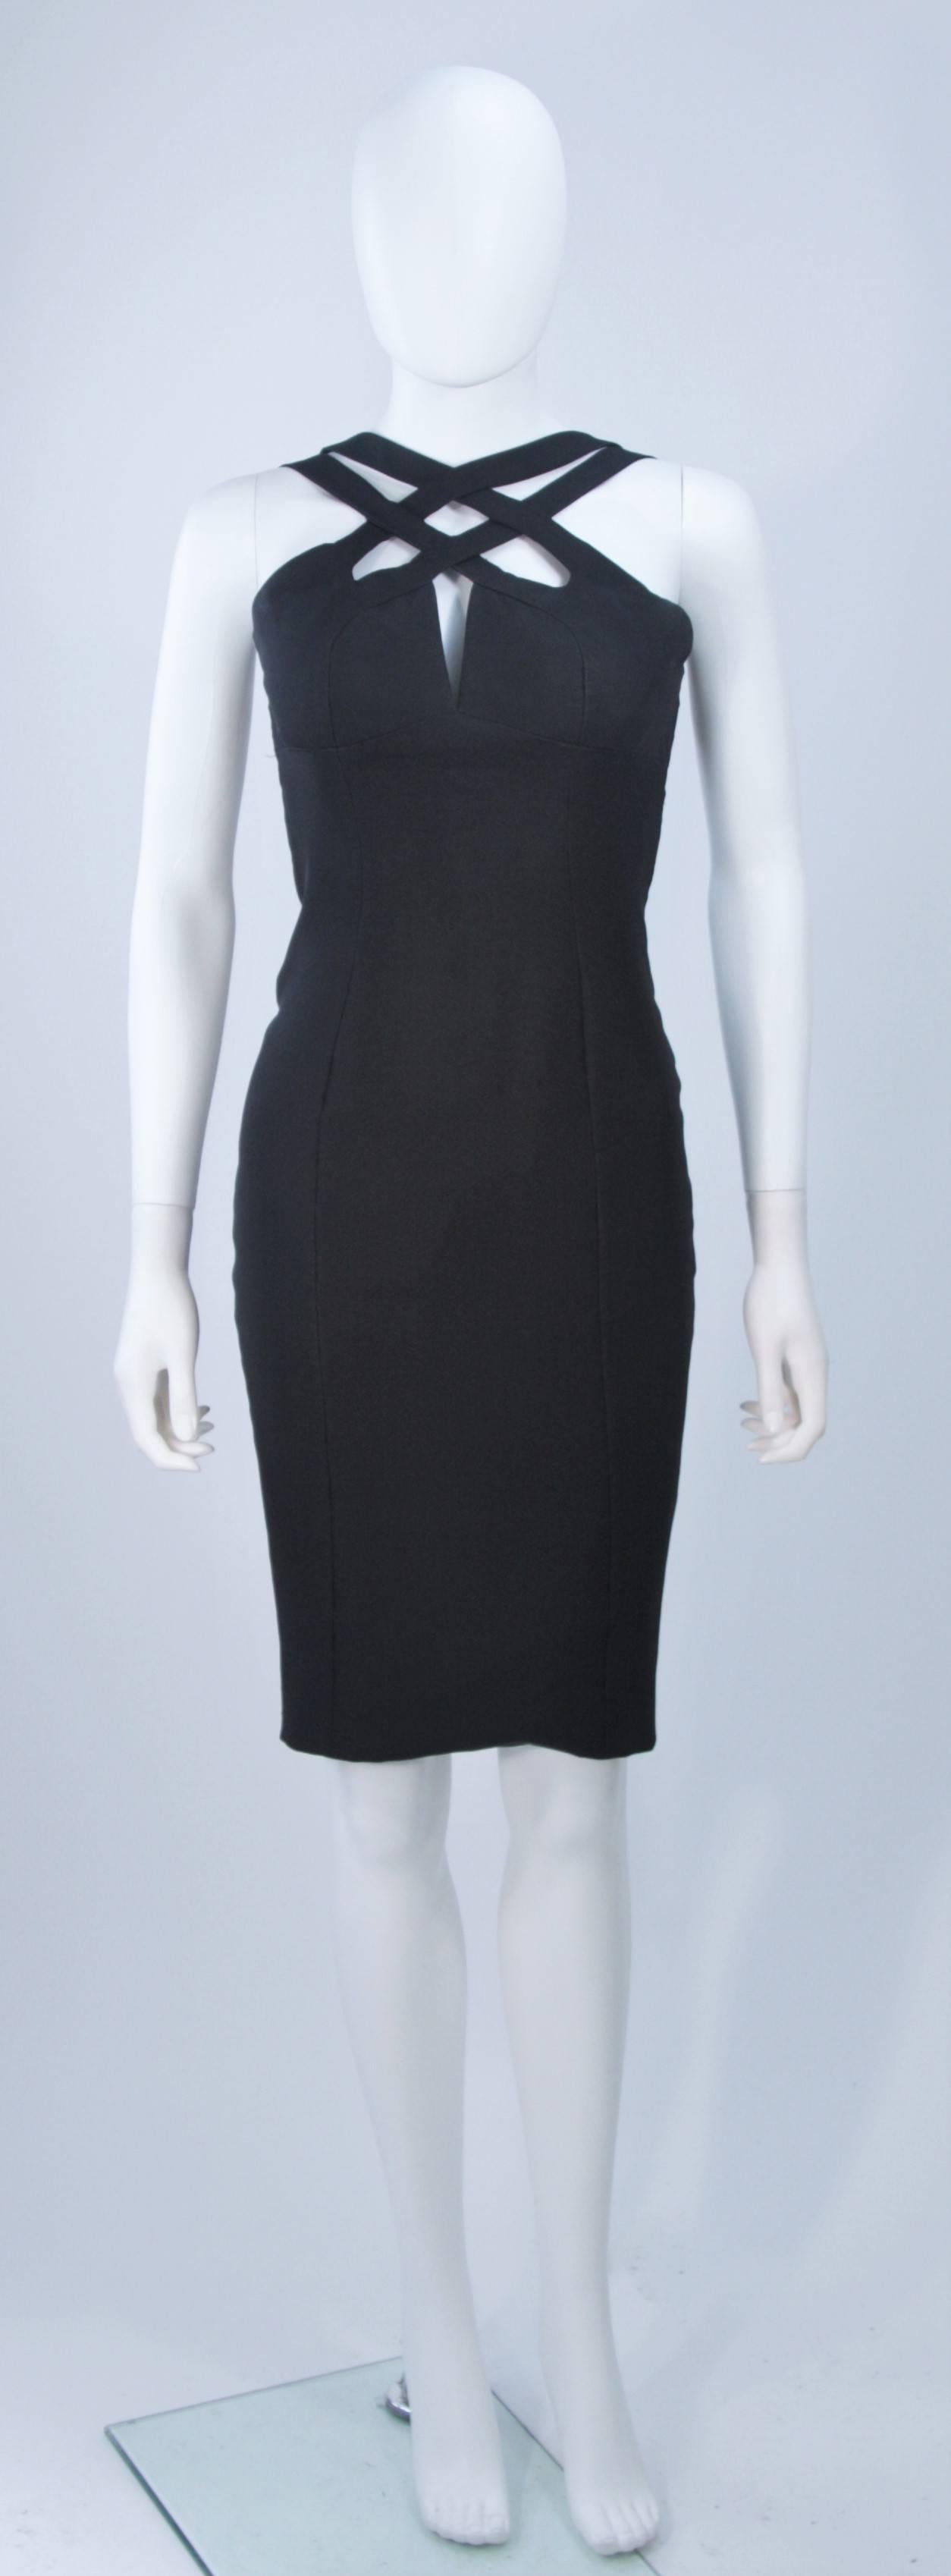 This Elizabeth Mason Couture cocktail dress is fashioned from the finest black silk dupioni and features gorgeous body skimming silhouette with a stunning peek-a-boo criss-cross detail. It is such a fabulous and chic design. Made in Beverly